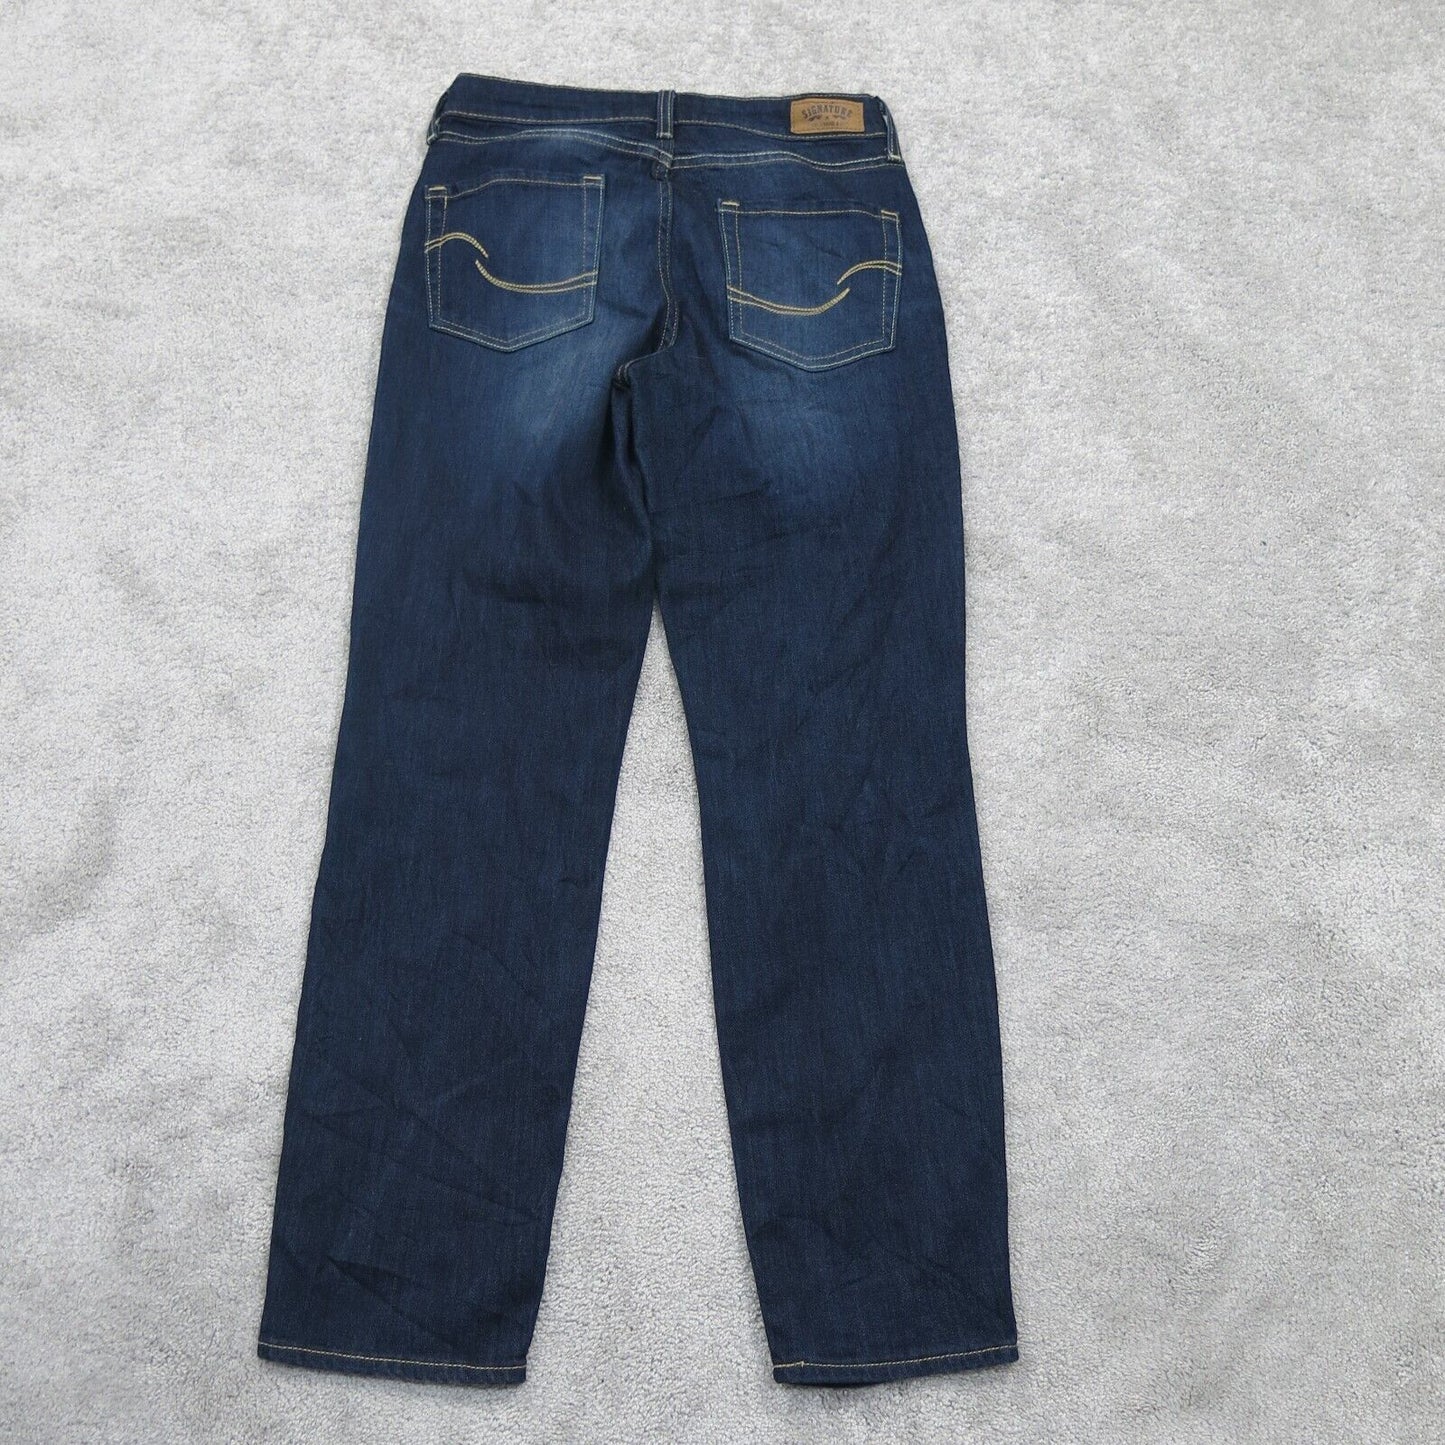 Signature by Levis Womens Slim Cuffed Jeans Mid Rise Pockets Blue Size W27